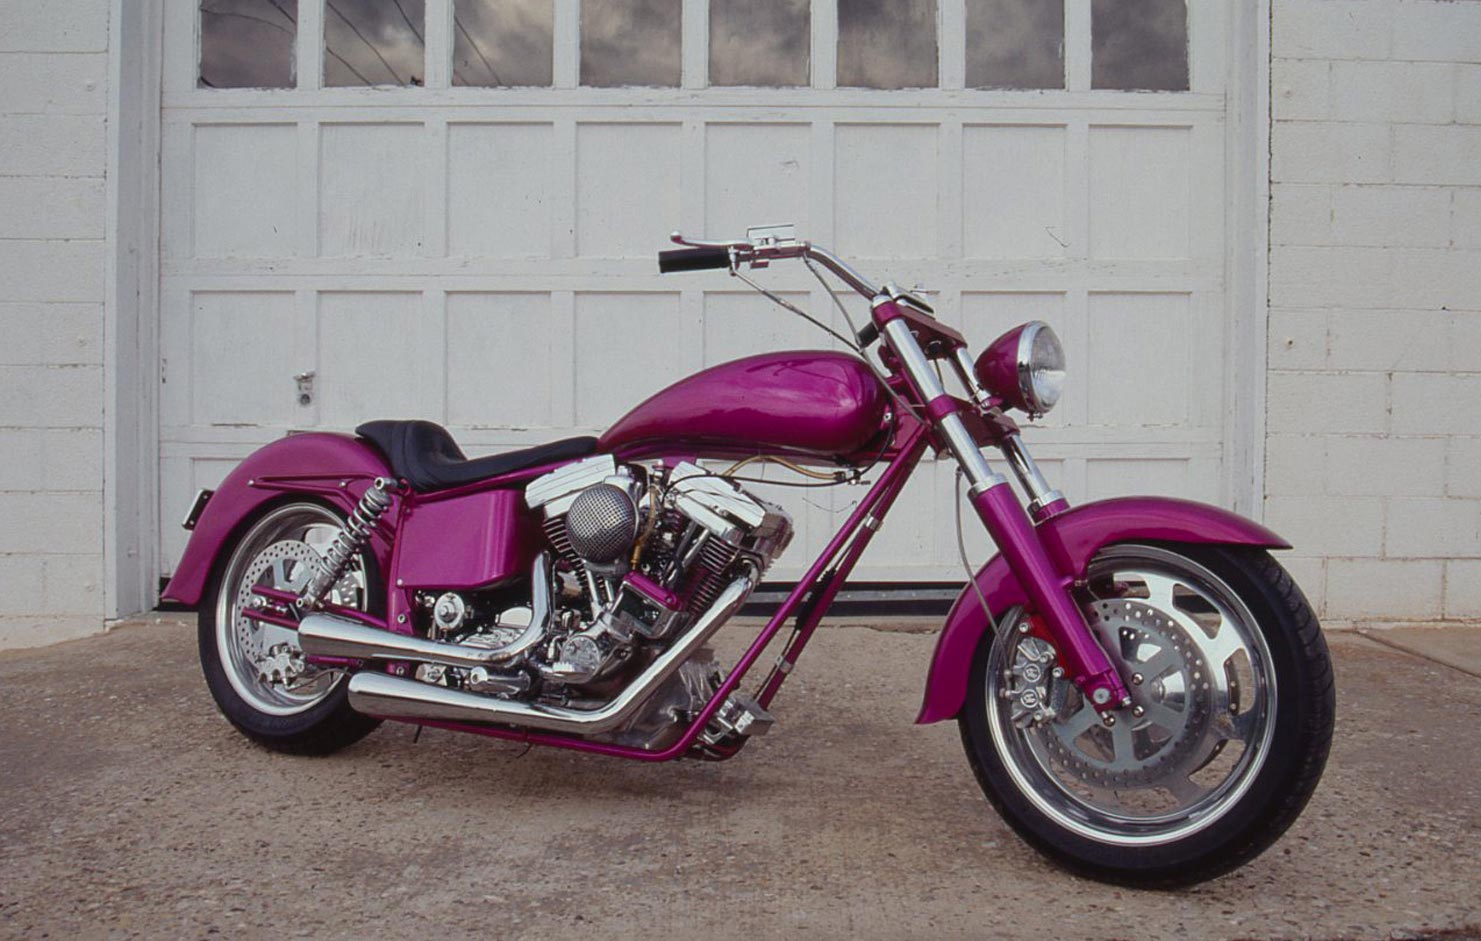 After three months of building and two weeks for paint and assembly, this was ready for Sturgis ’93.